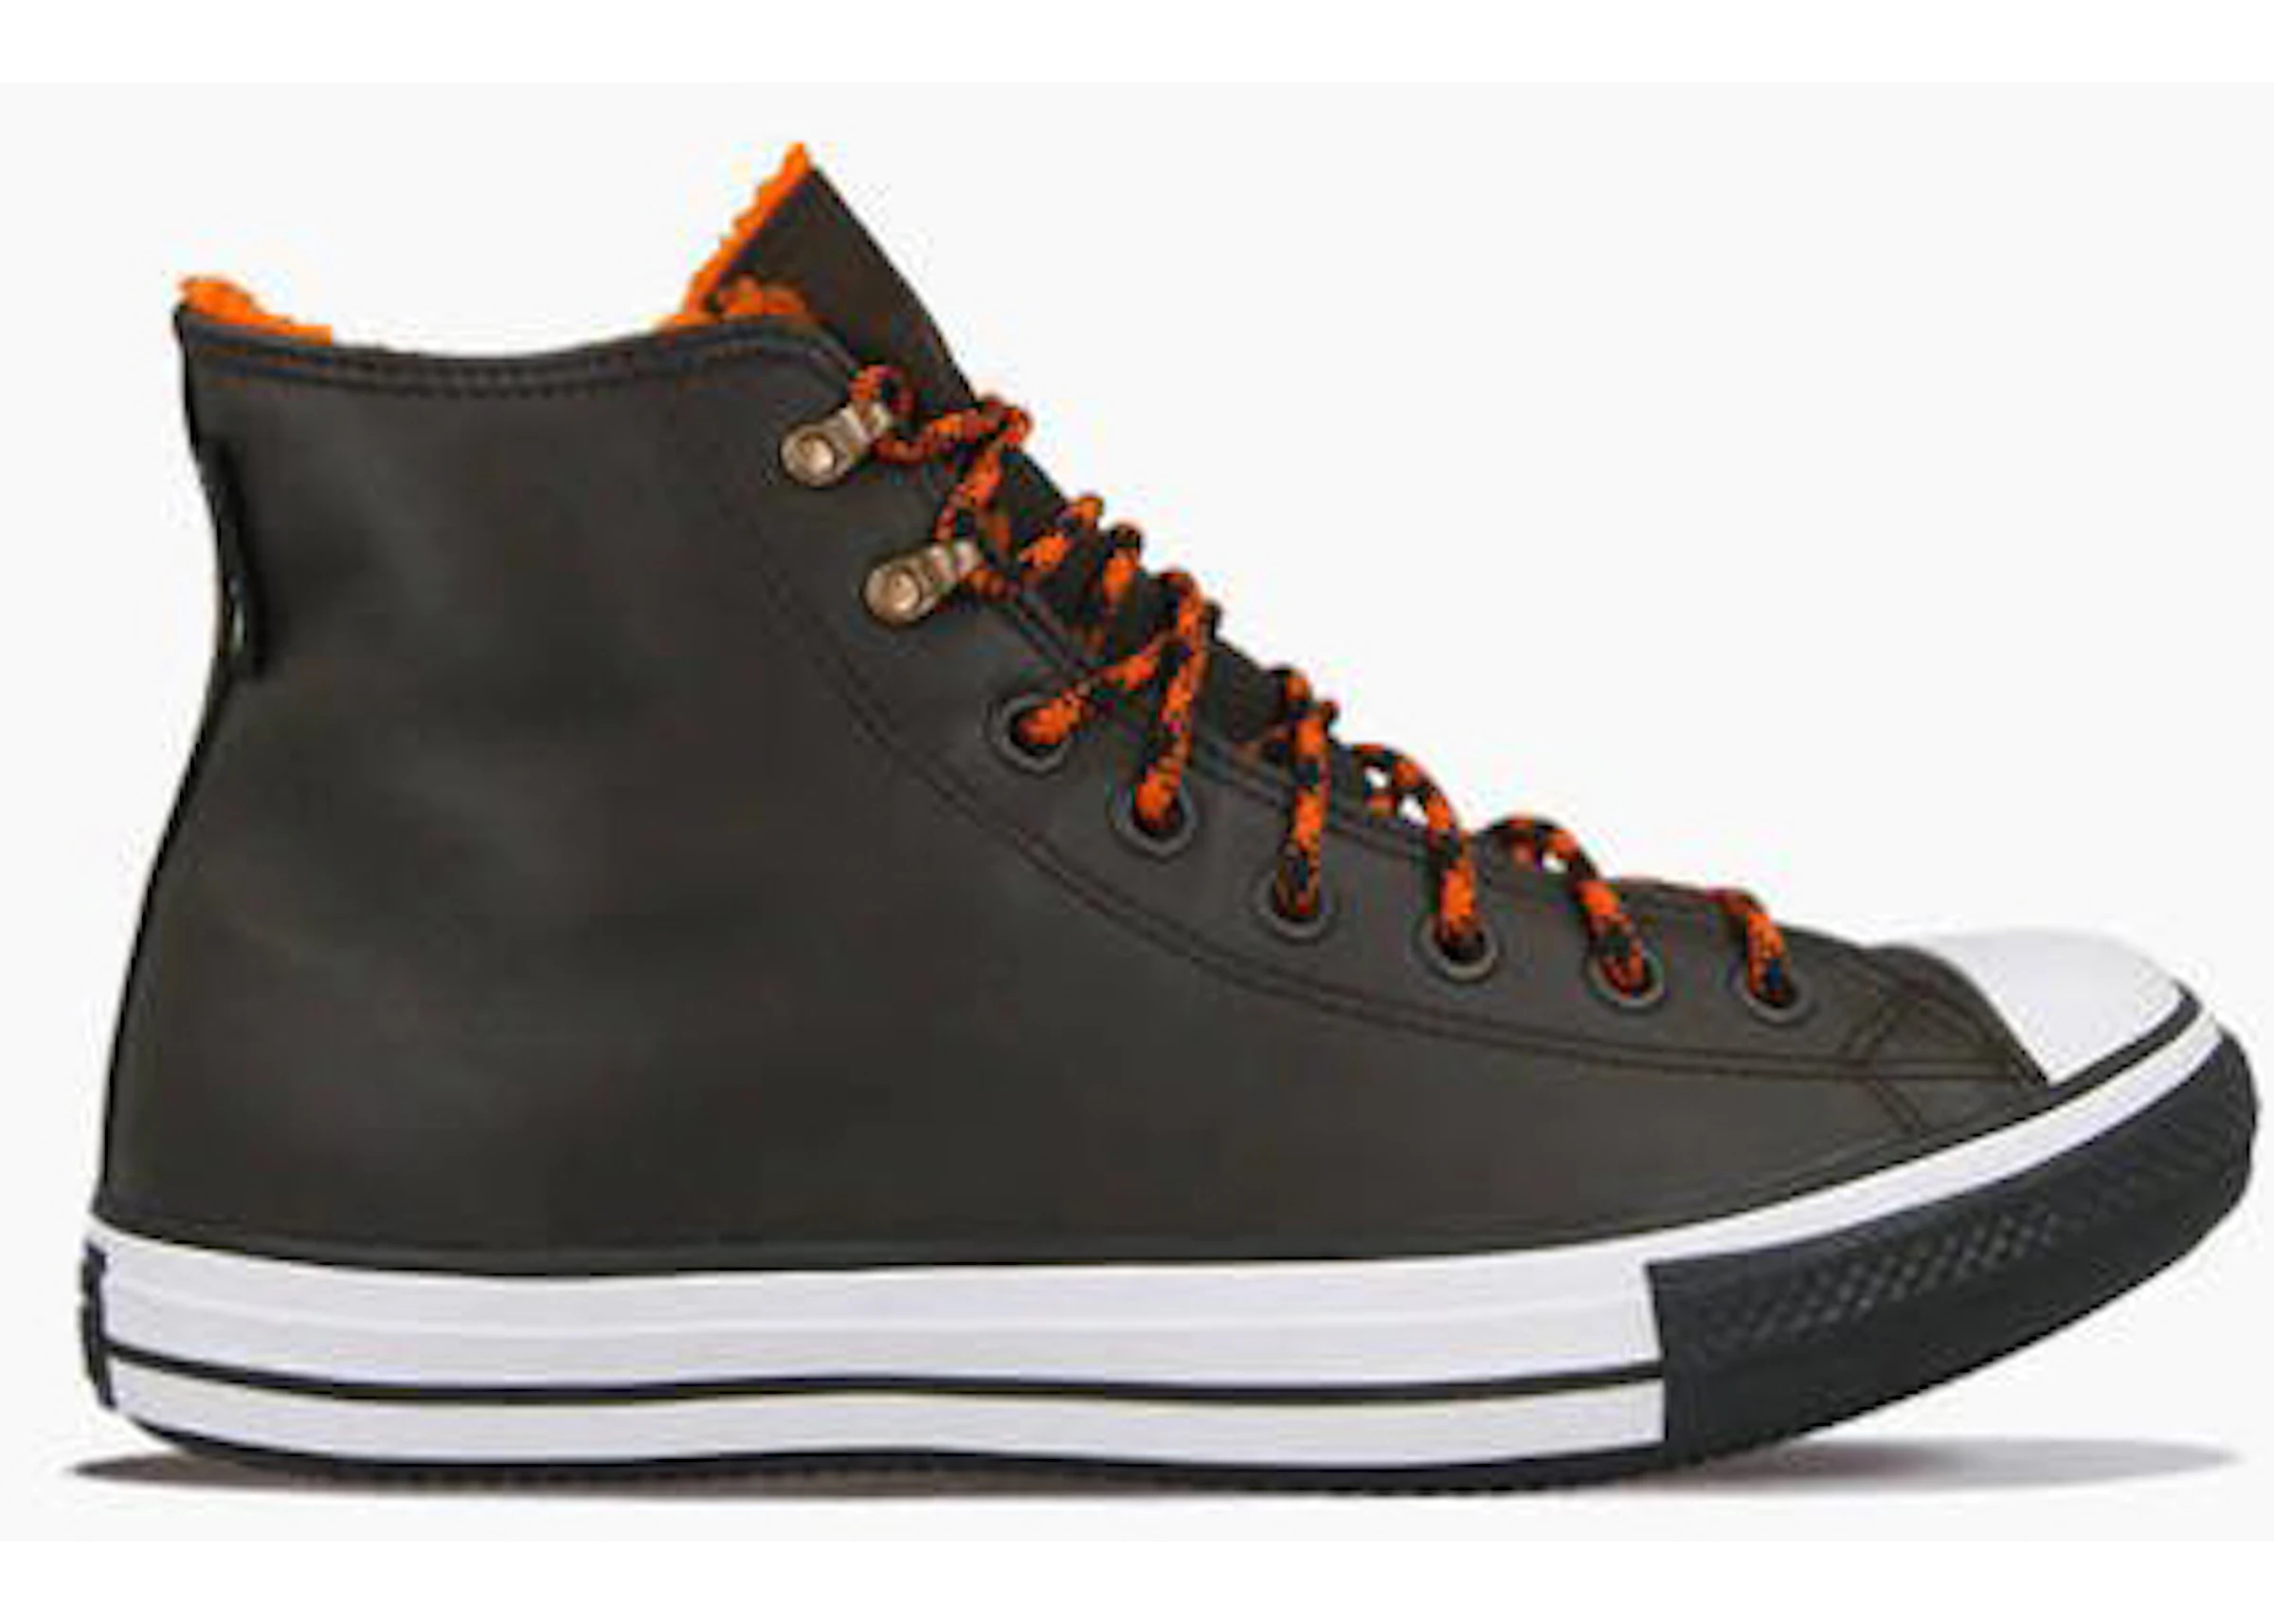 Converse Chuck Taylor All-Star Winter Hi Gore-Tex Leather Velvet Brown -  165933C - US